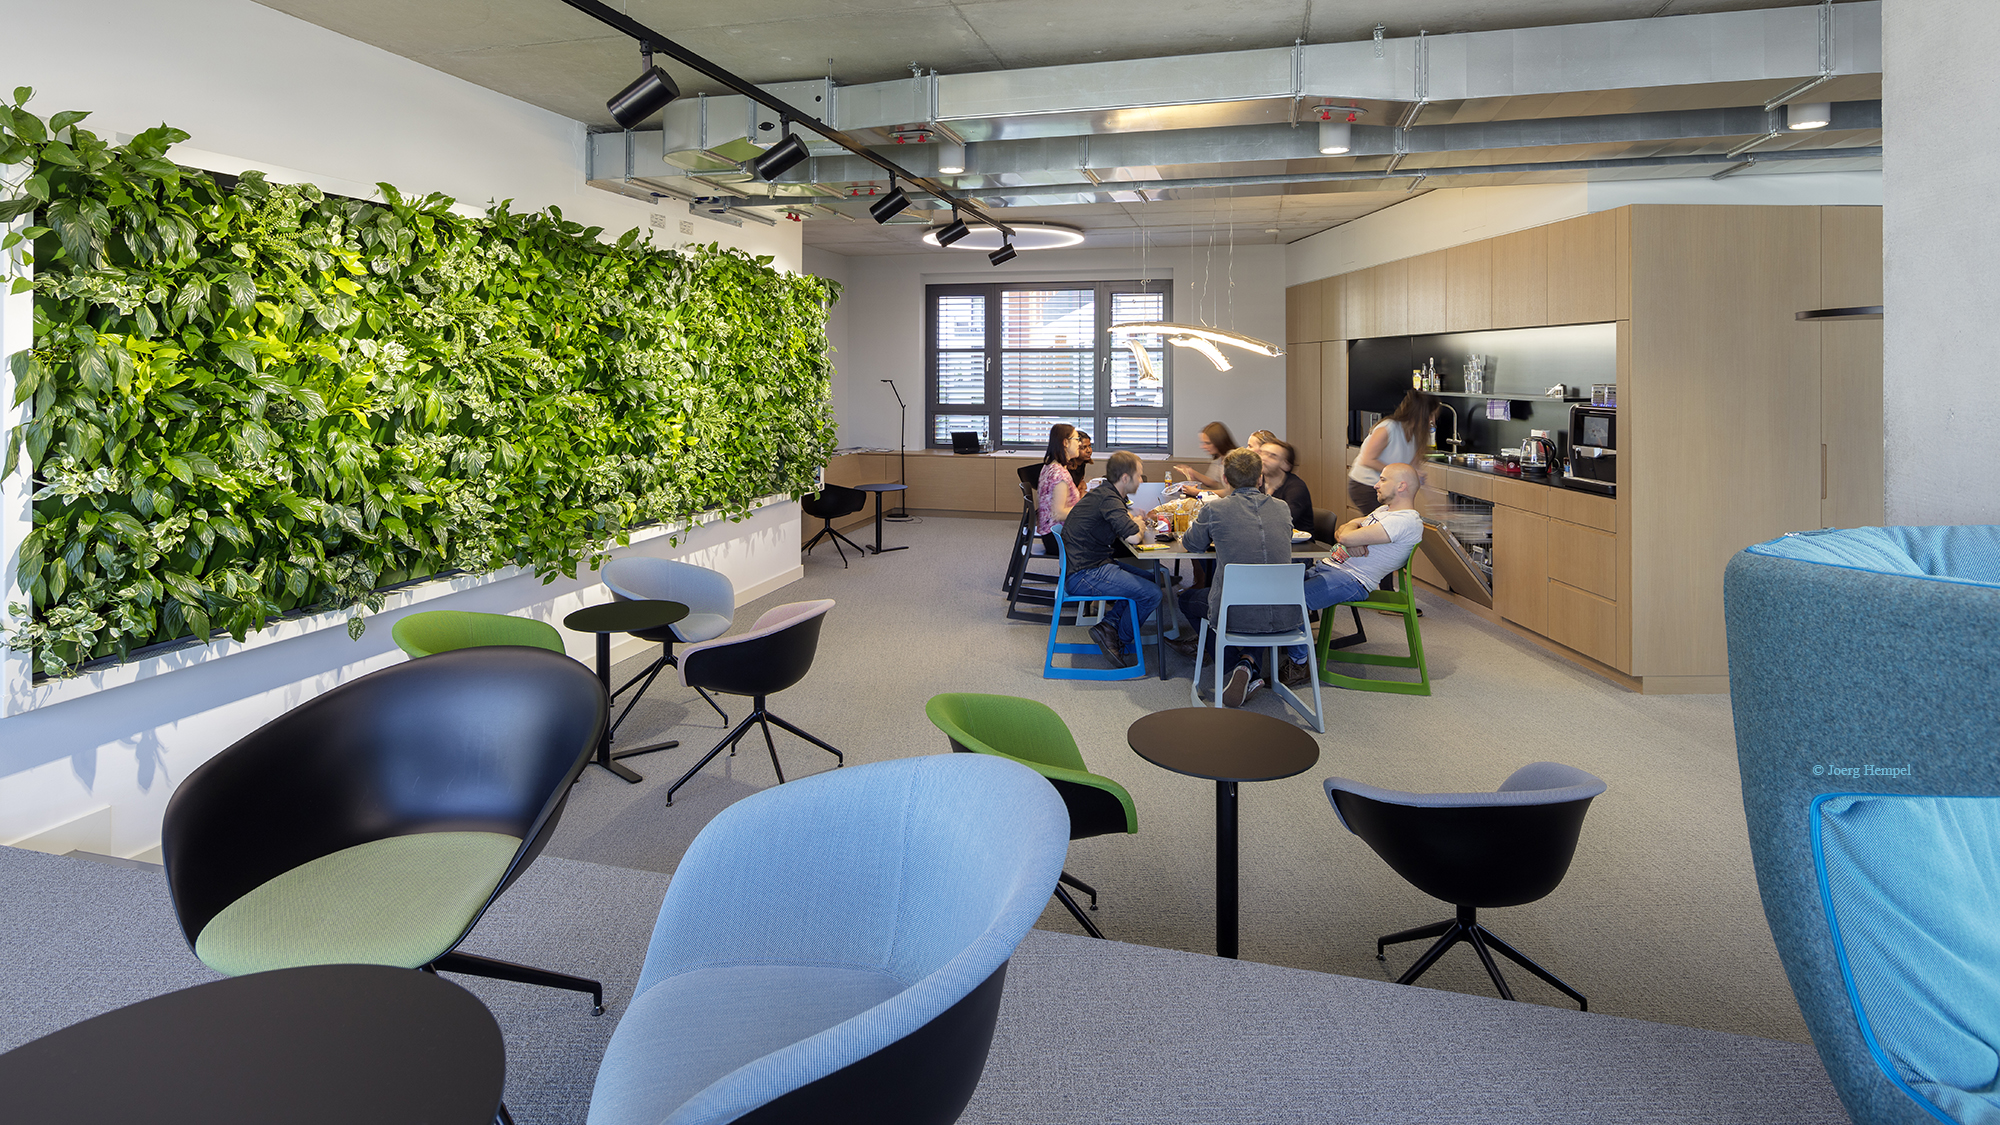 The employees' lounge of the Frankfurt office with its green café, communal lunch table and seating arrangements invites people to meet in a relaxed atmosphere. 